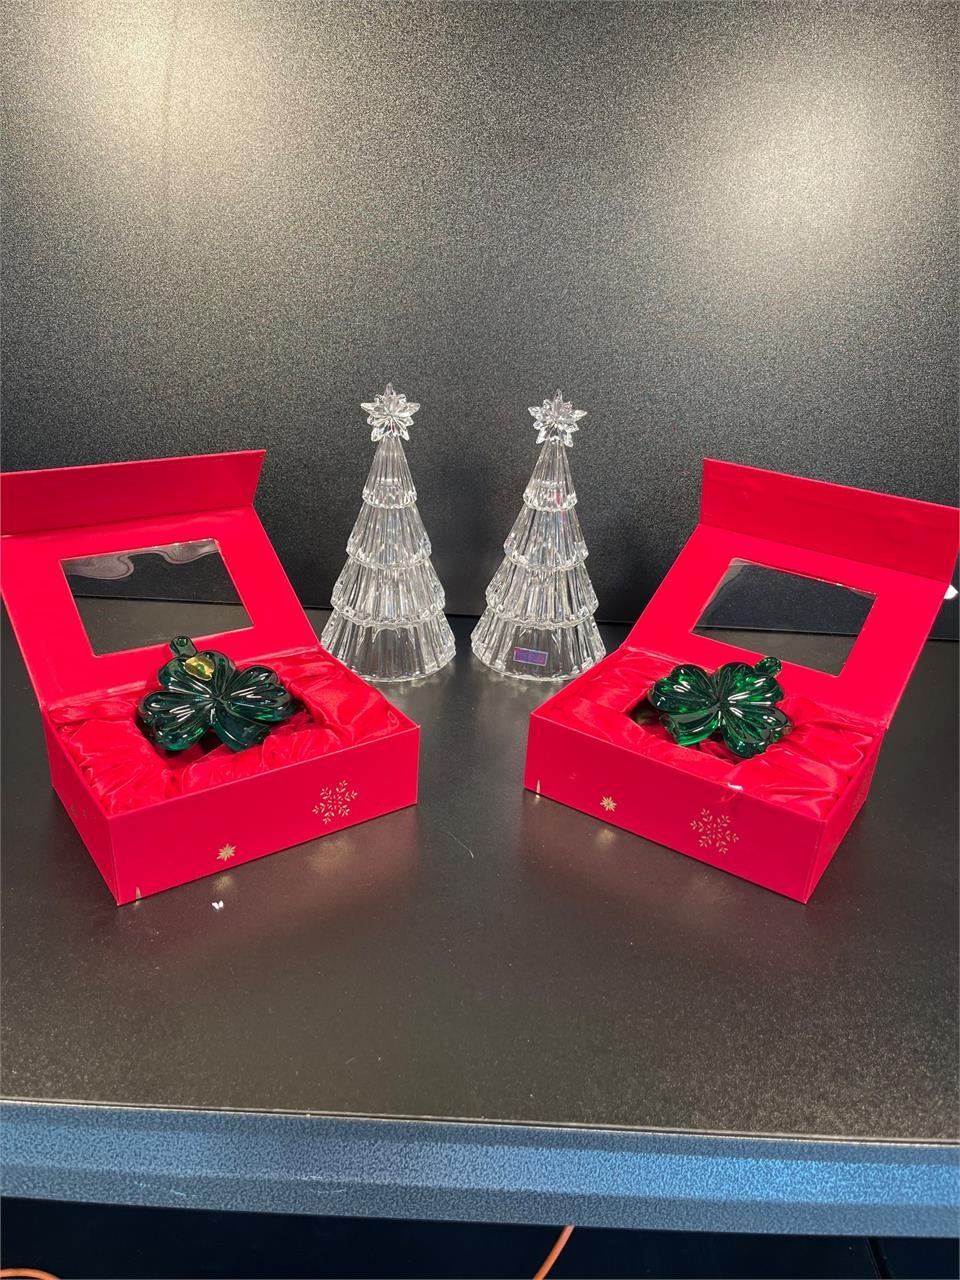 4 Pieces of Xmas Themed Waterford Crystal